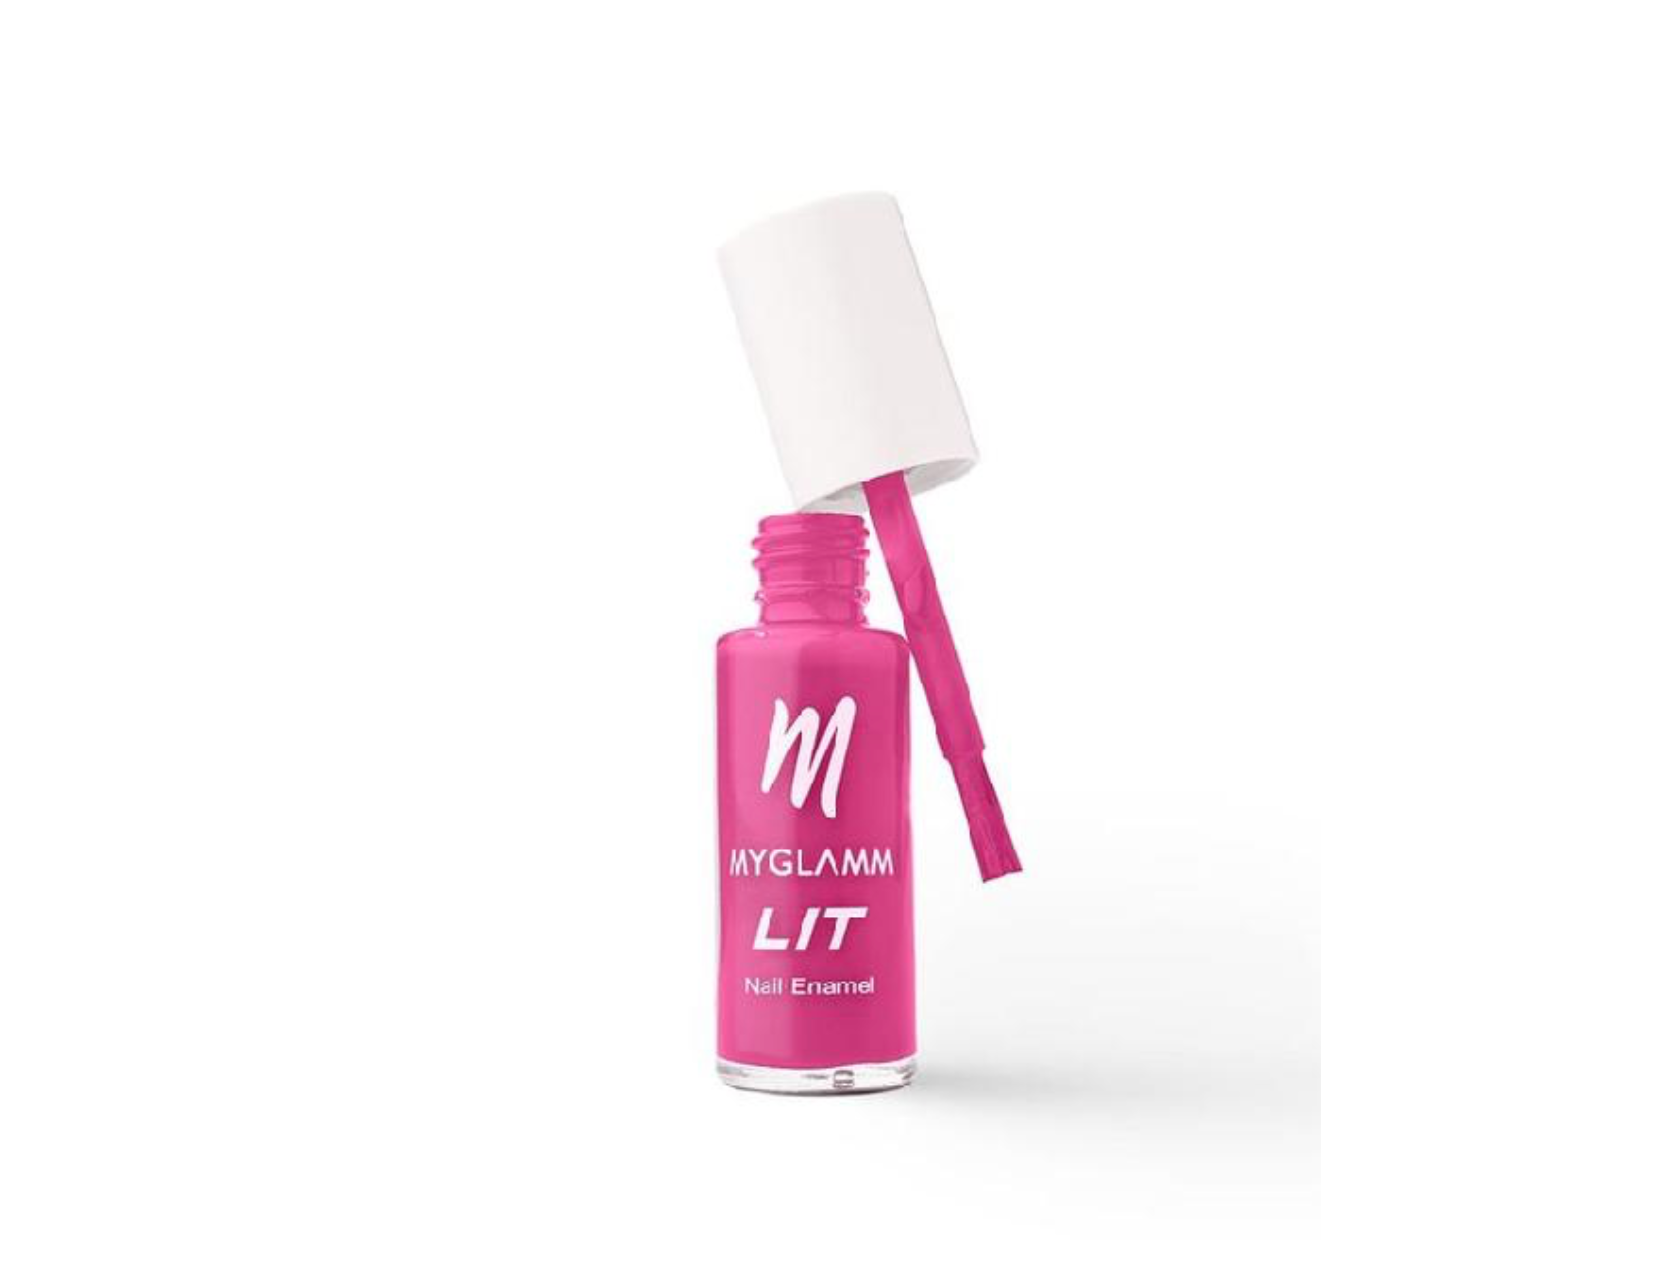 Love A Good Pop Of Colour On Your Nails? Try The MyGlamm LIT Nail Enamels